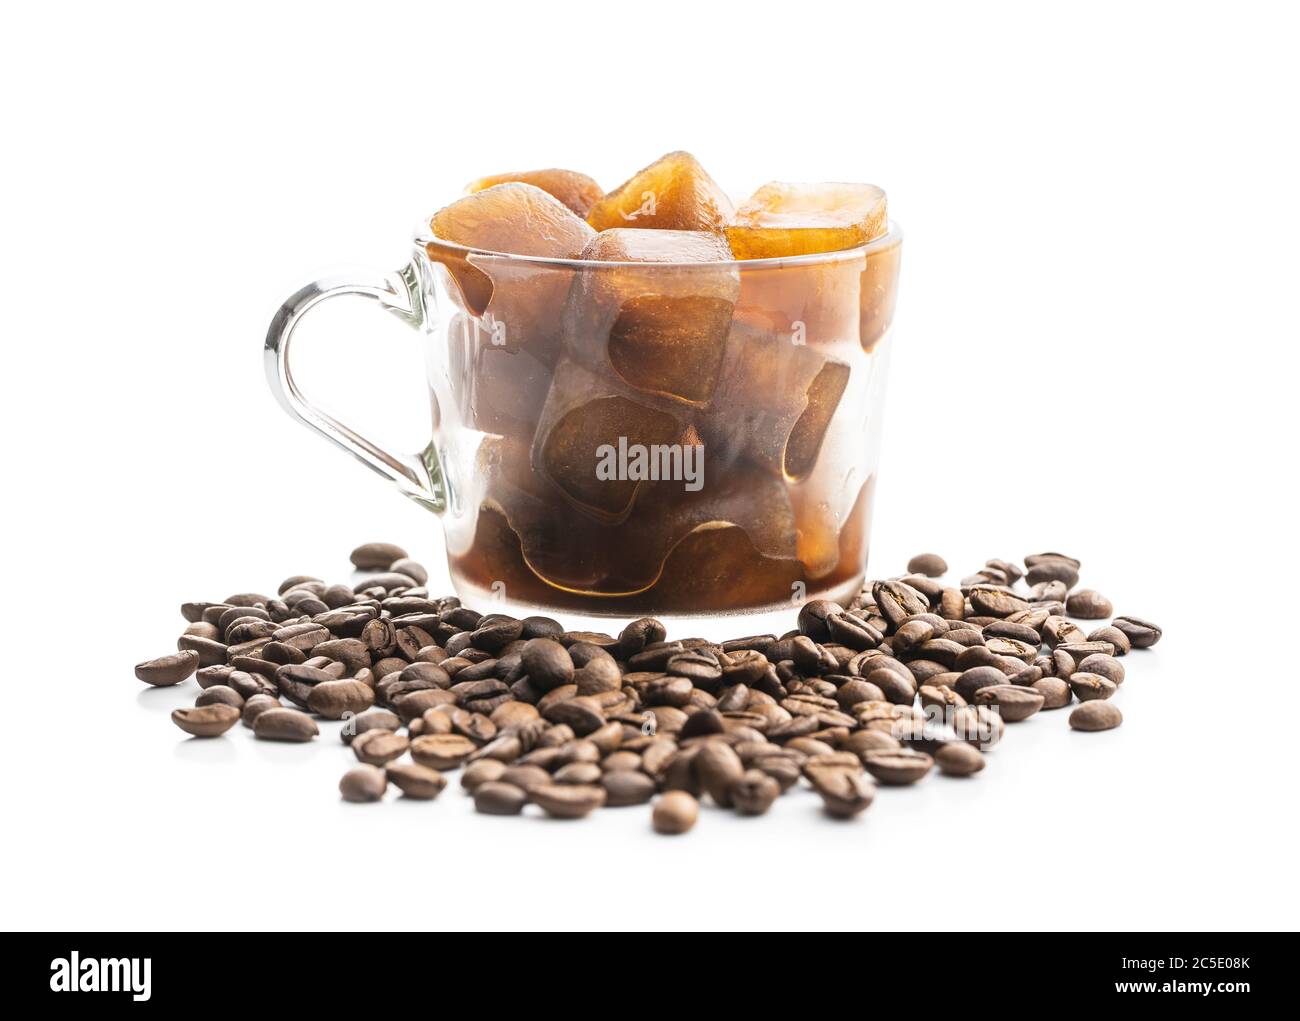 https://c8.alamy.com/comp/2C5E08K/frozen-coffee-coffee-ice-cubes-and-coffee-beans-isolated-on-white-background-2C5E08K.jpg